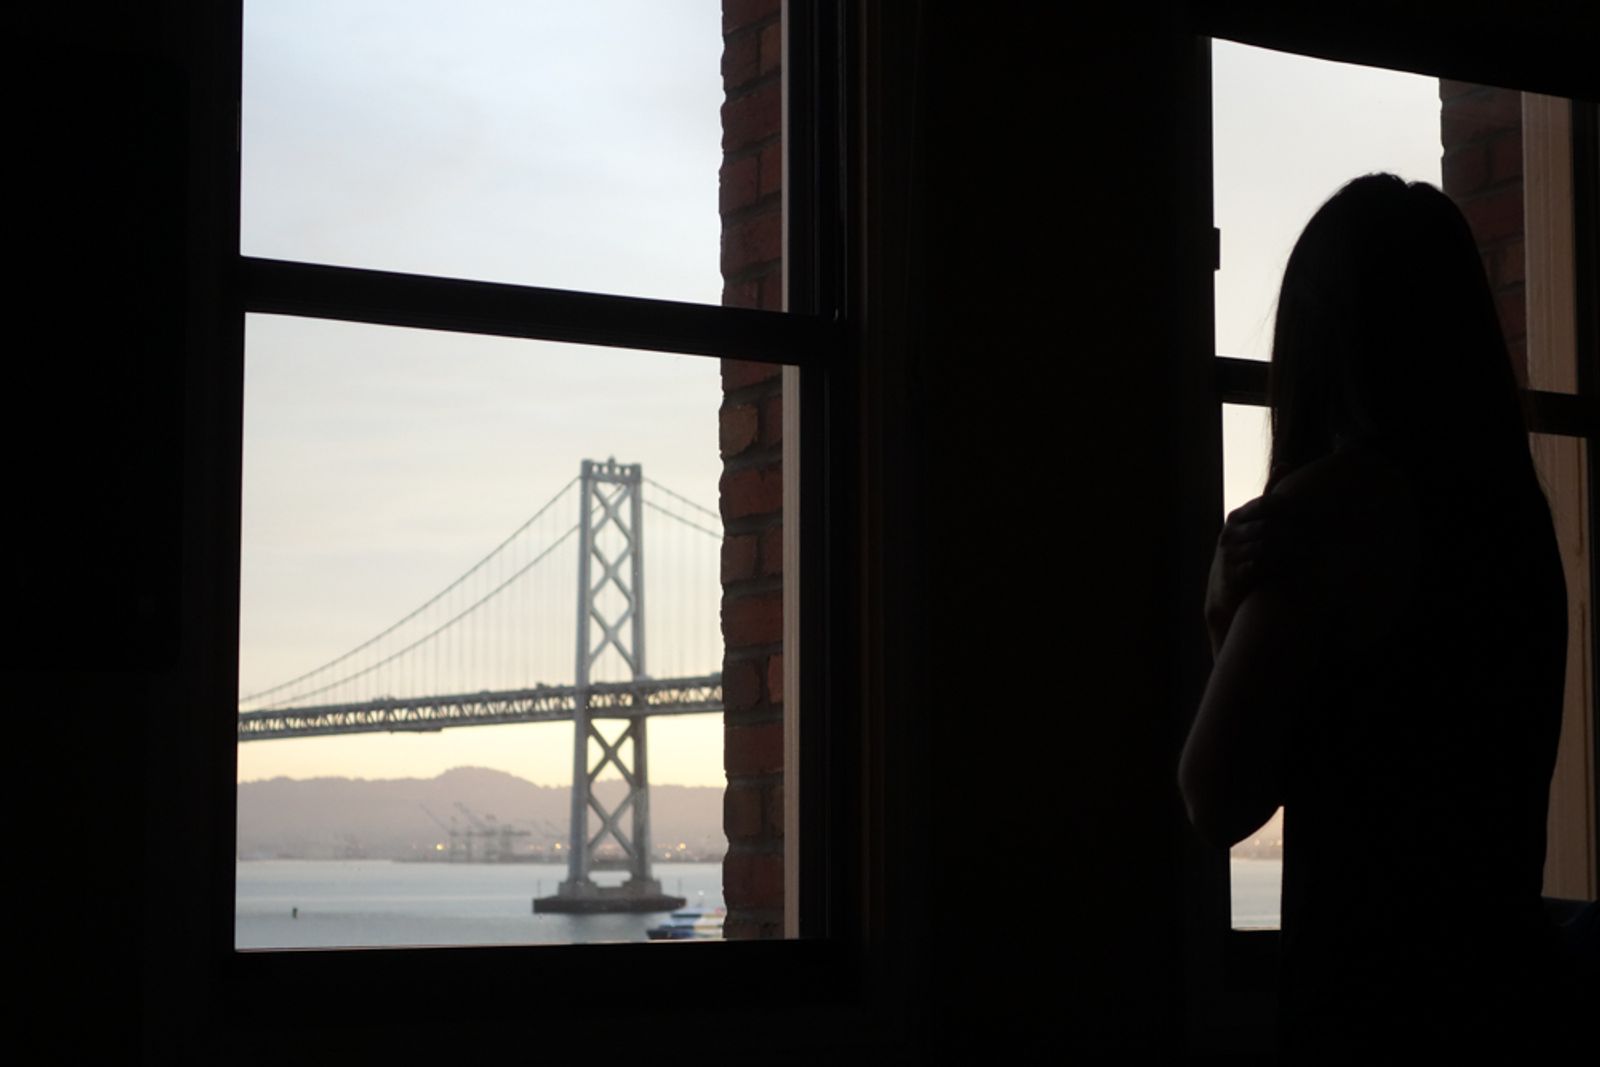 © Vincent Dupont-Blackshaw - Bay Bridge: One morning in San Fransisco, a traveller look at the Bay Bridge through the her hotel room's window